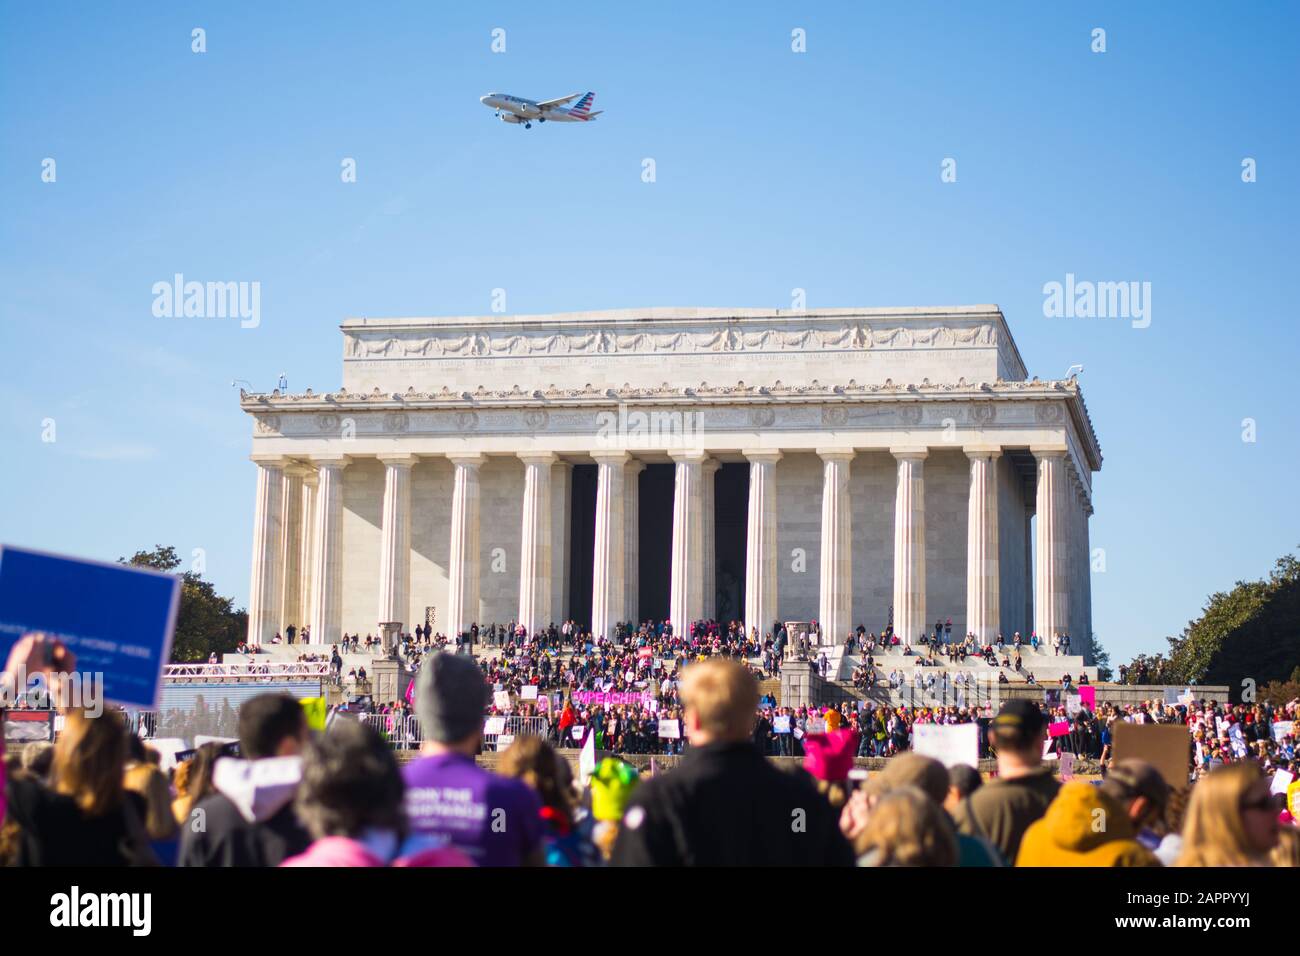 Washington, DC - January 20, 2018: Activists gather in front of the Lincoln Memorial for the Women's March with a plane flying overhead. Stock Photo